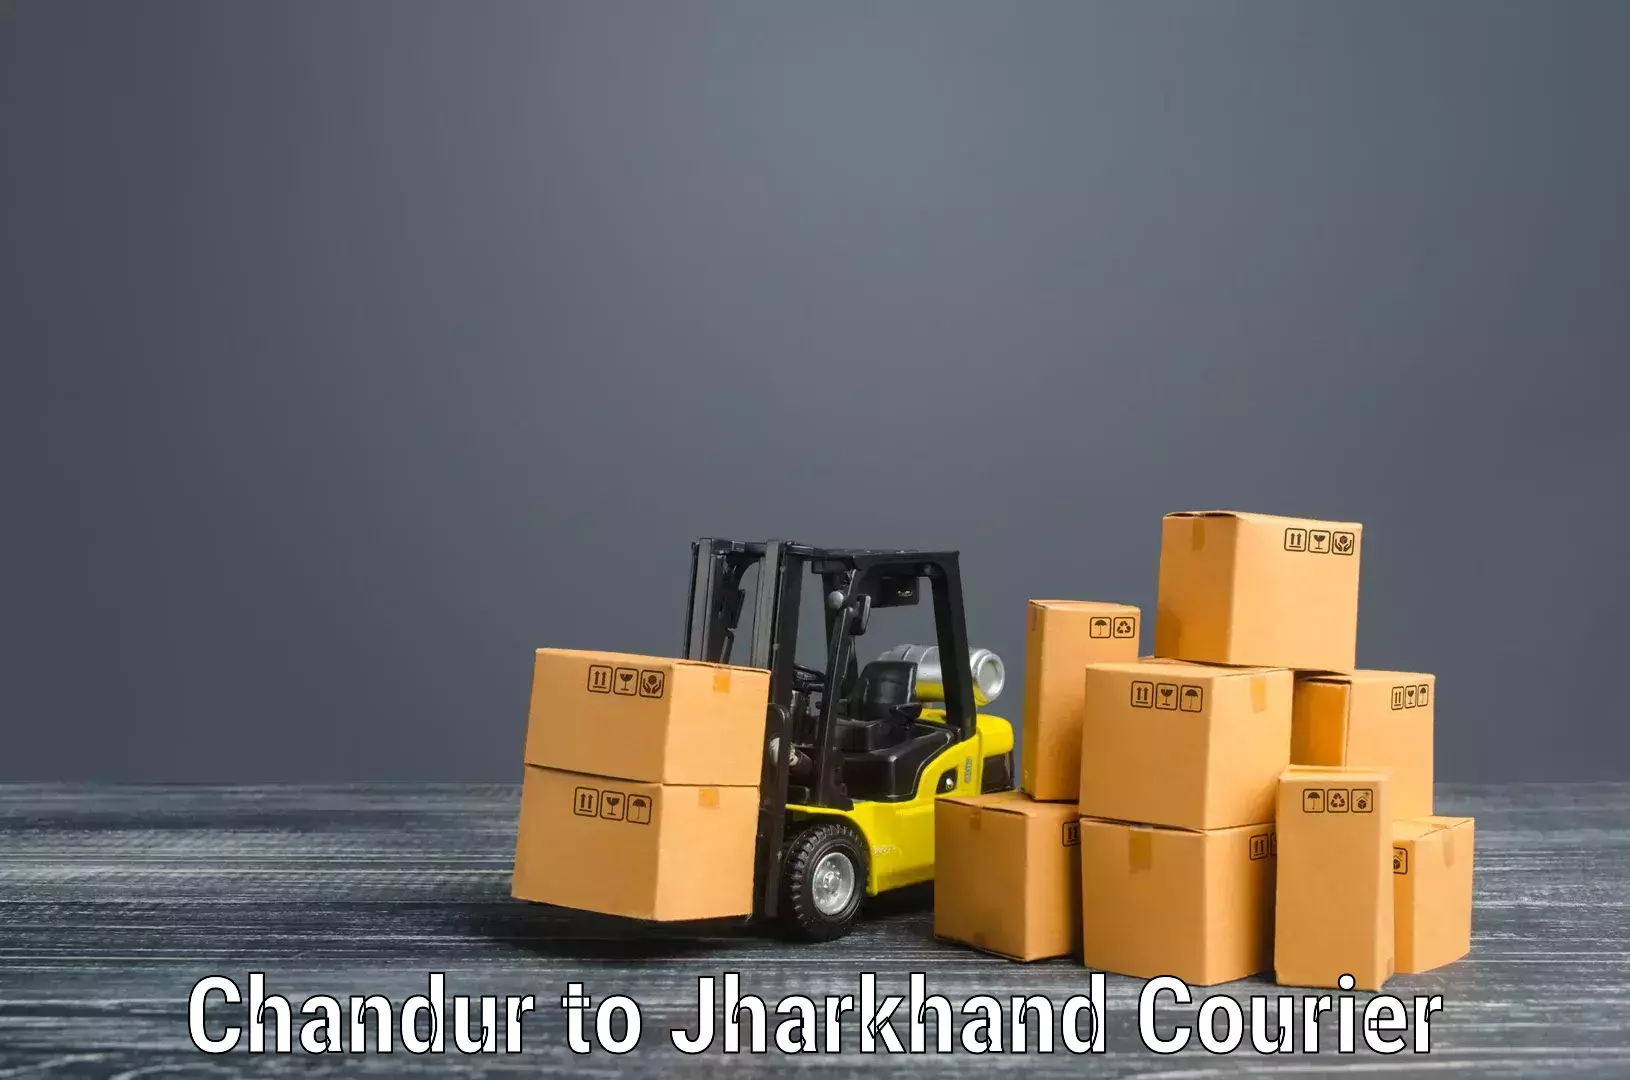 Trusted moving company Chandur to Dhanbad